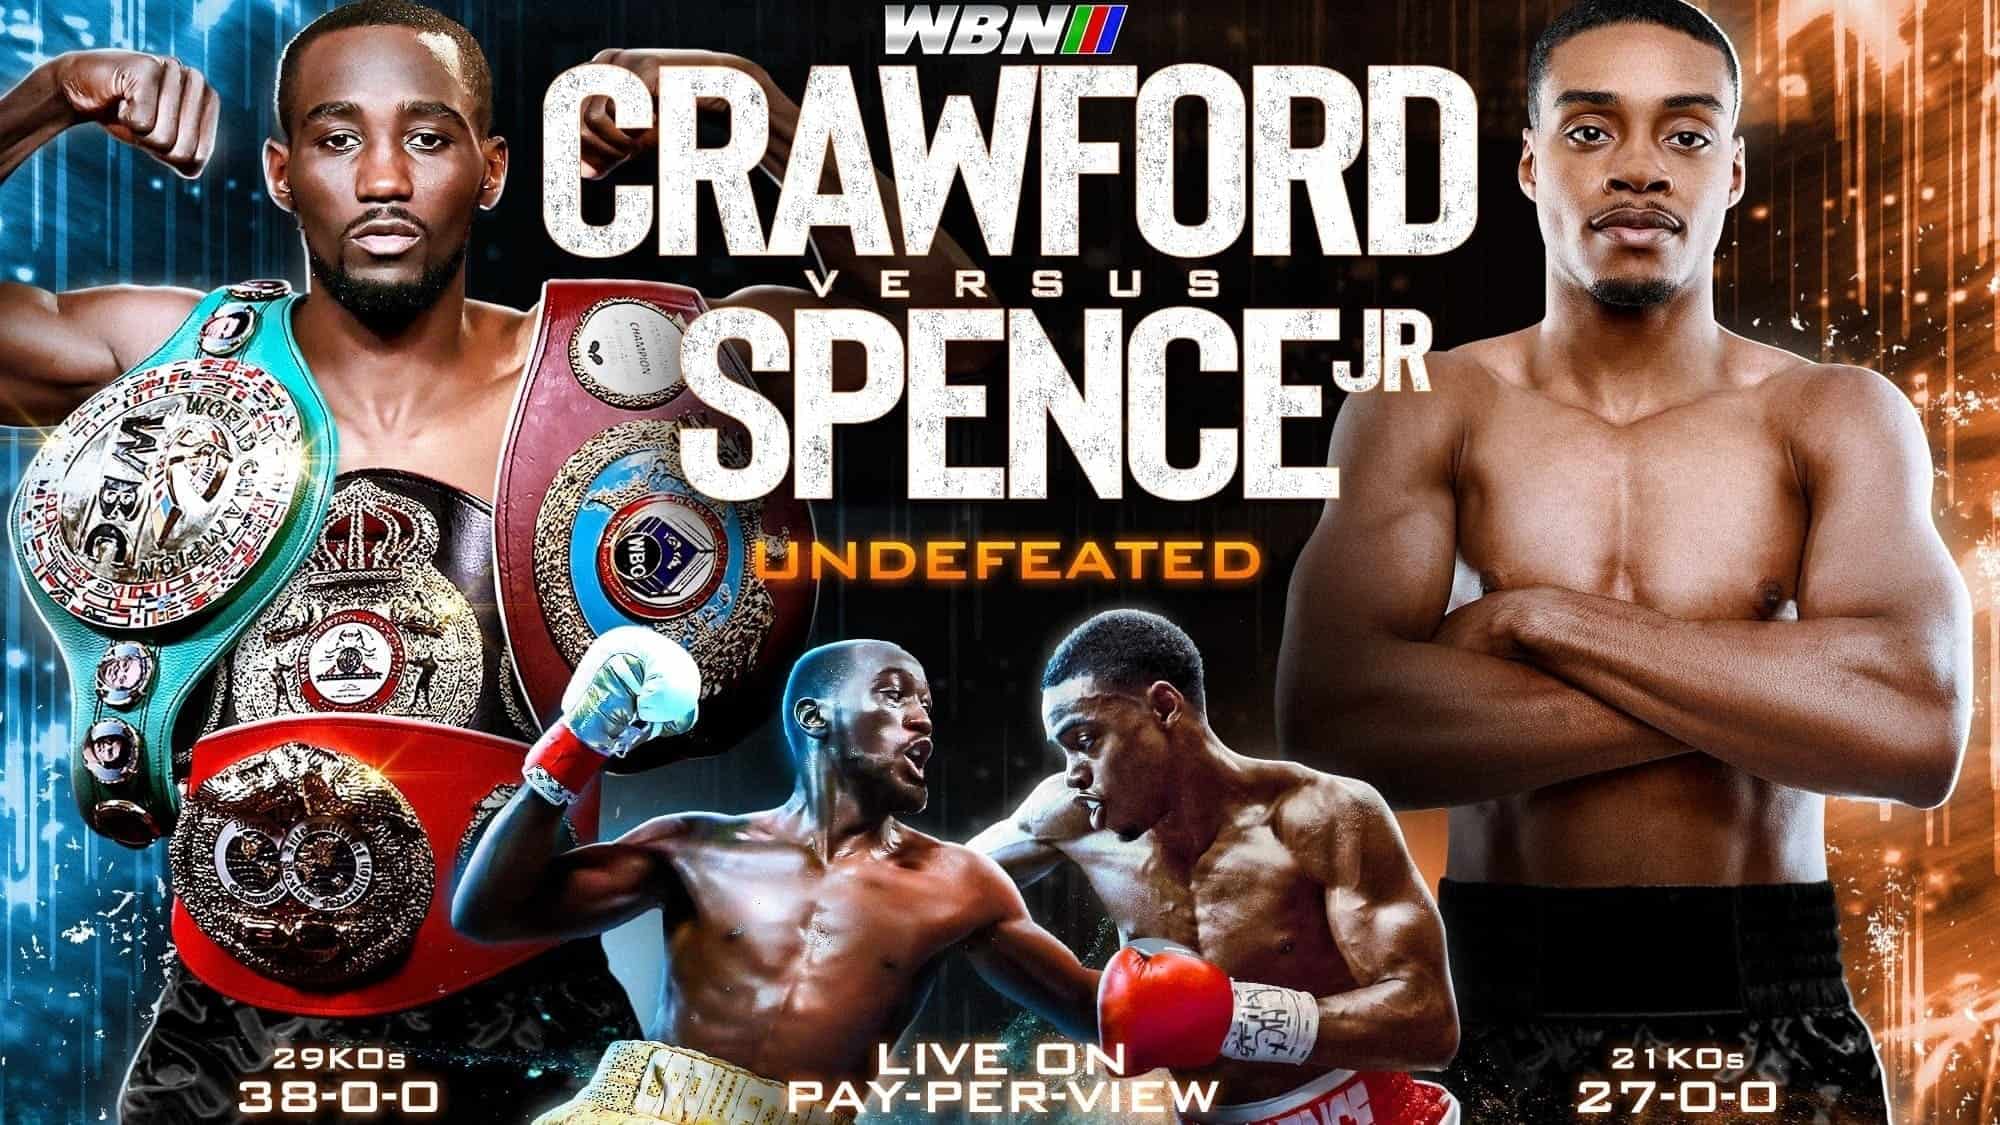 Everything You Need to Know about the Spence vs Crawford Fight